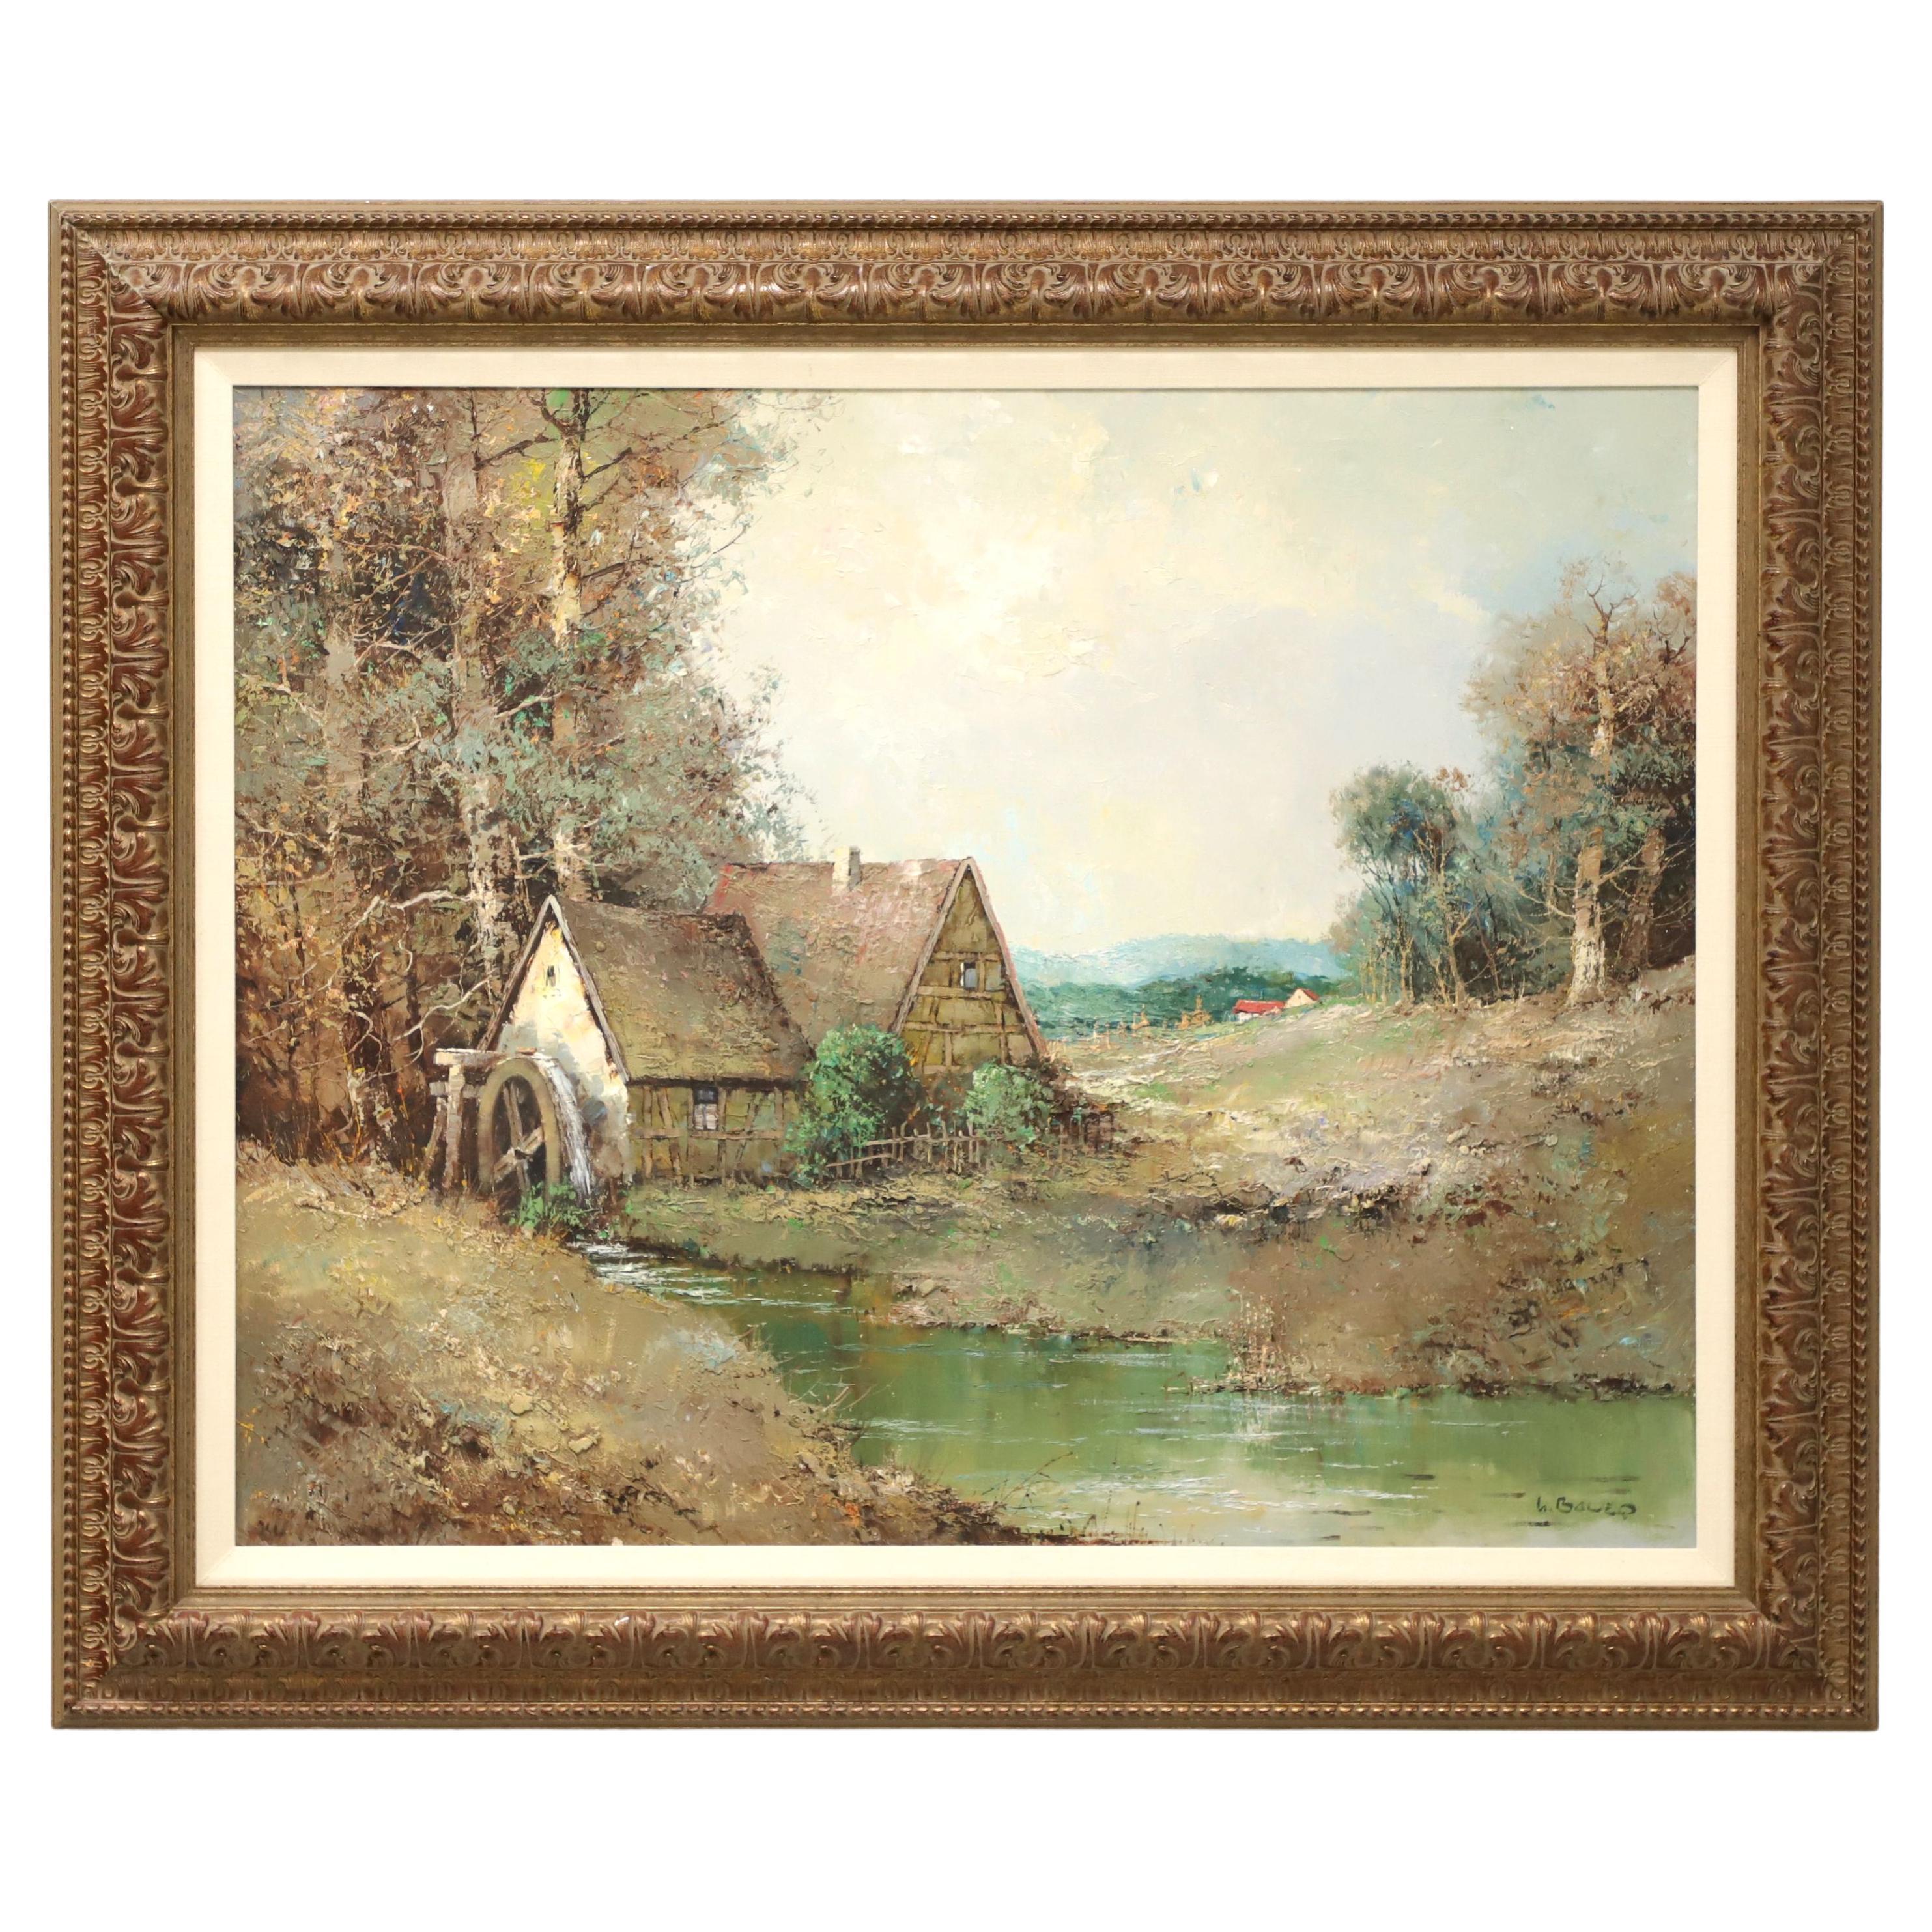 Original Acrylic on Canvas Painting - Watermill Scene - Signed L. Bauer For Sale